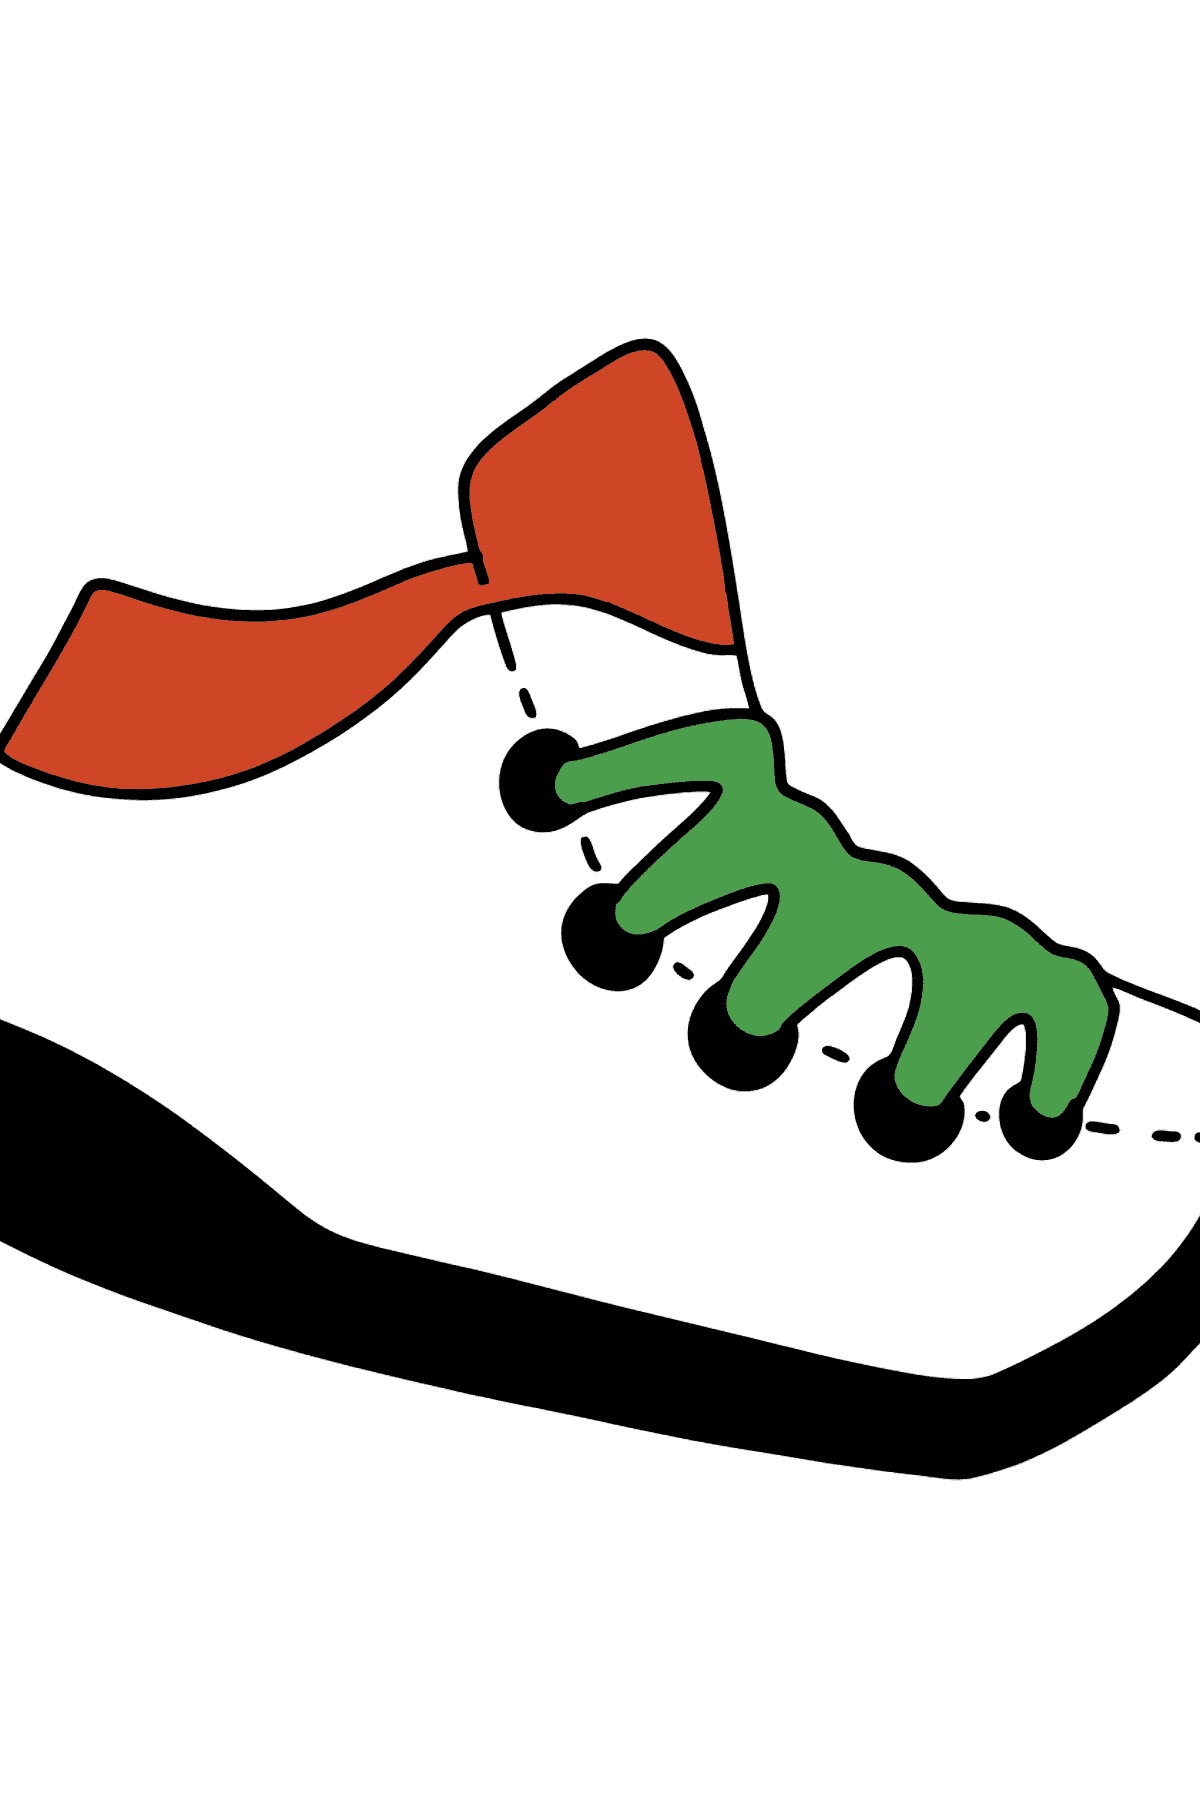 Light-colored Sneakers coloring page - Coloring Pages for Kids